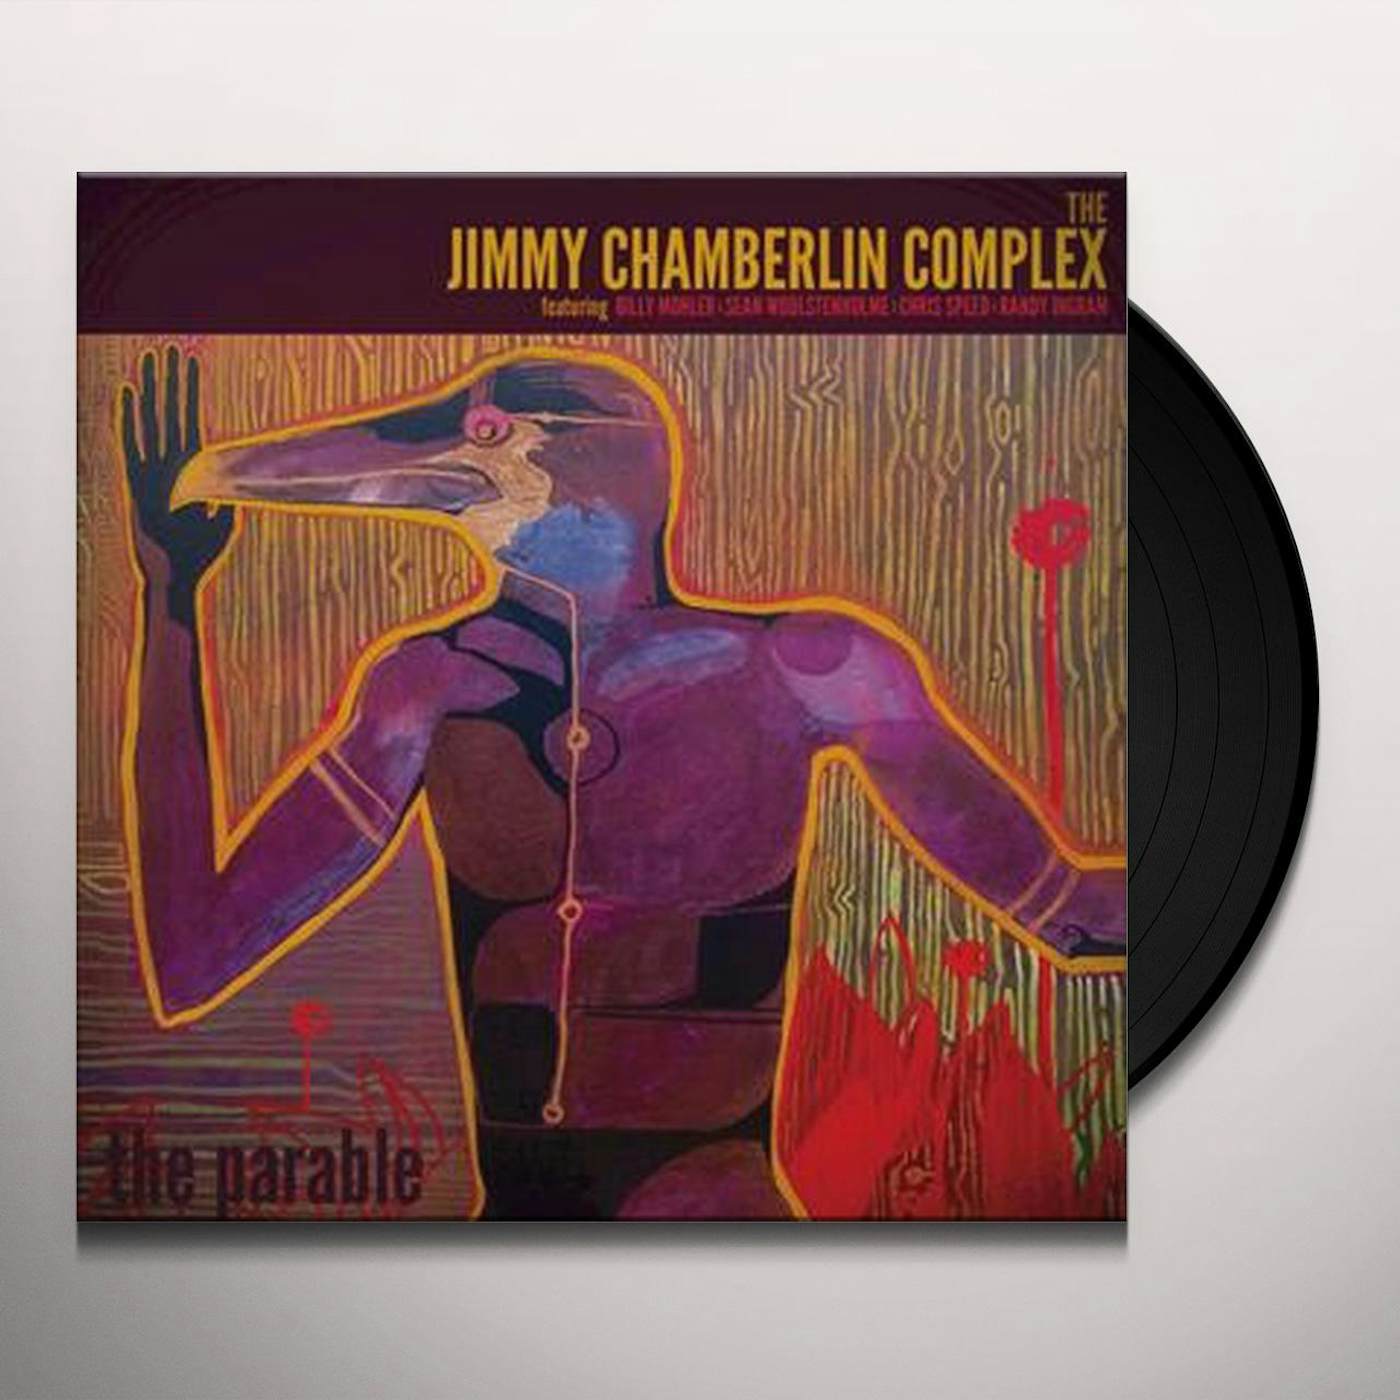 Jimmy Chamberlin Complex PARABLE Vinyl Record